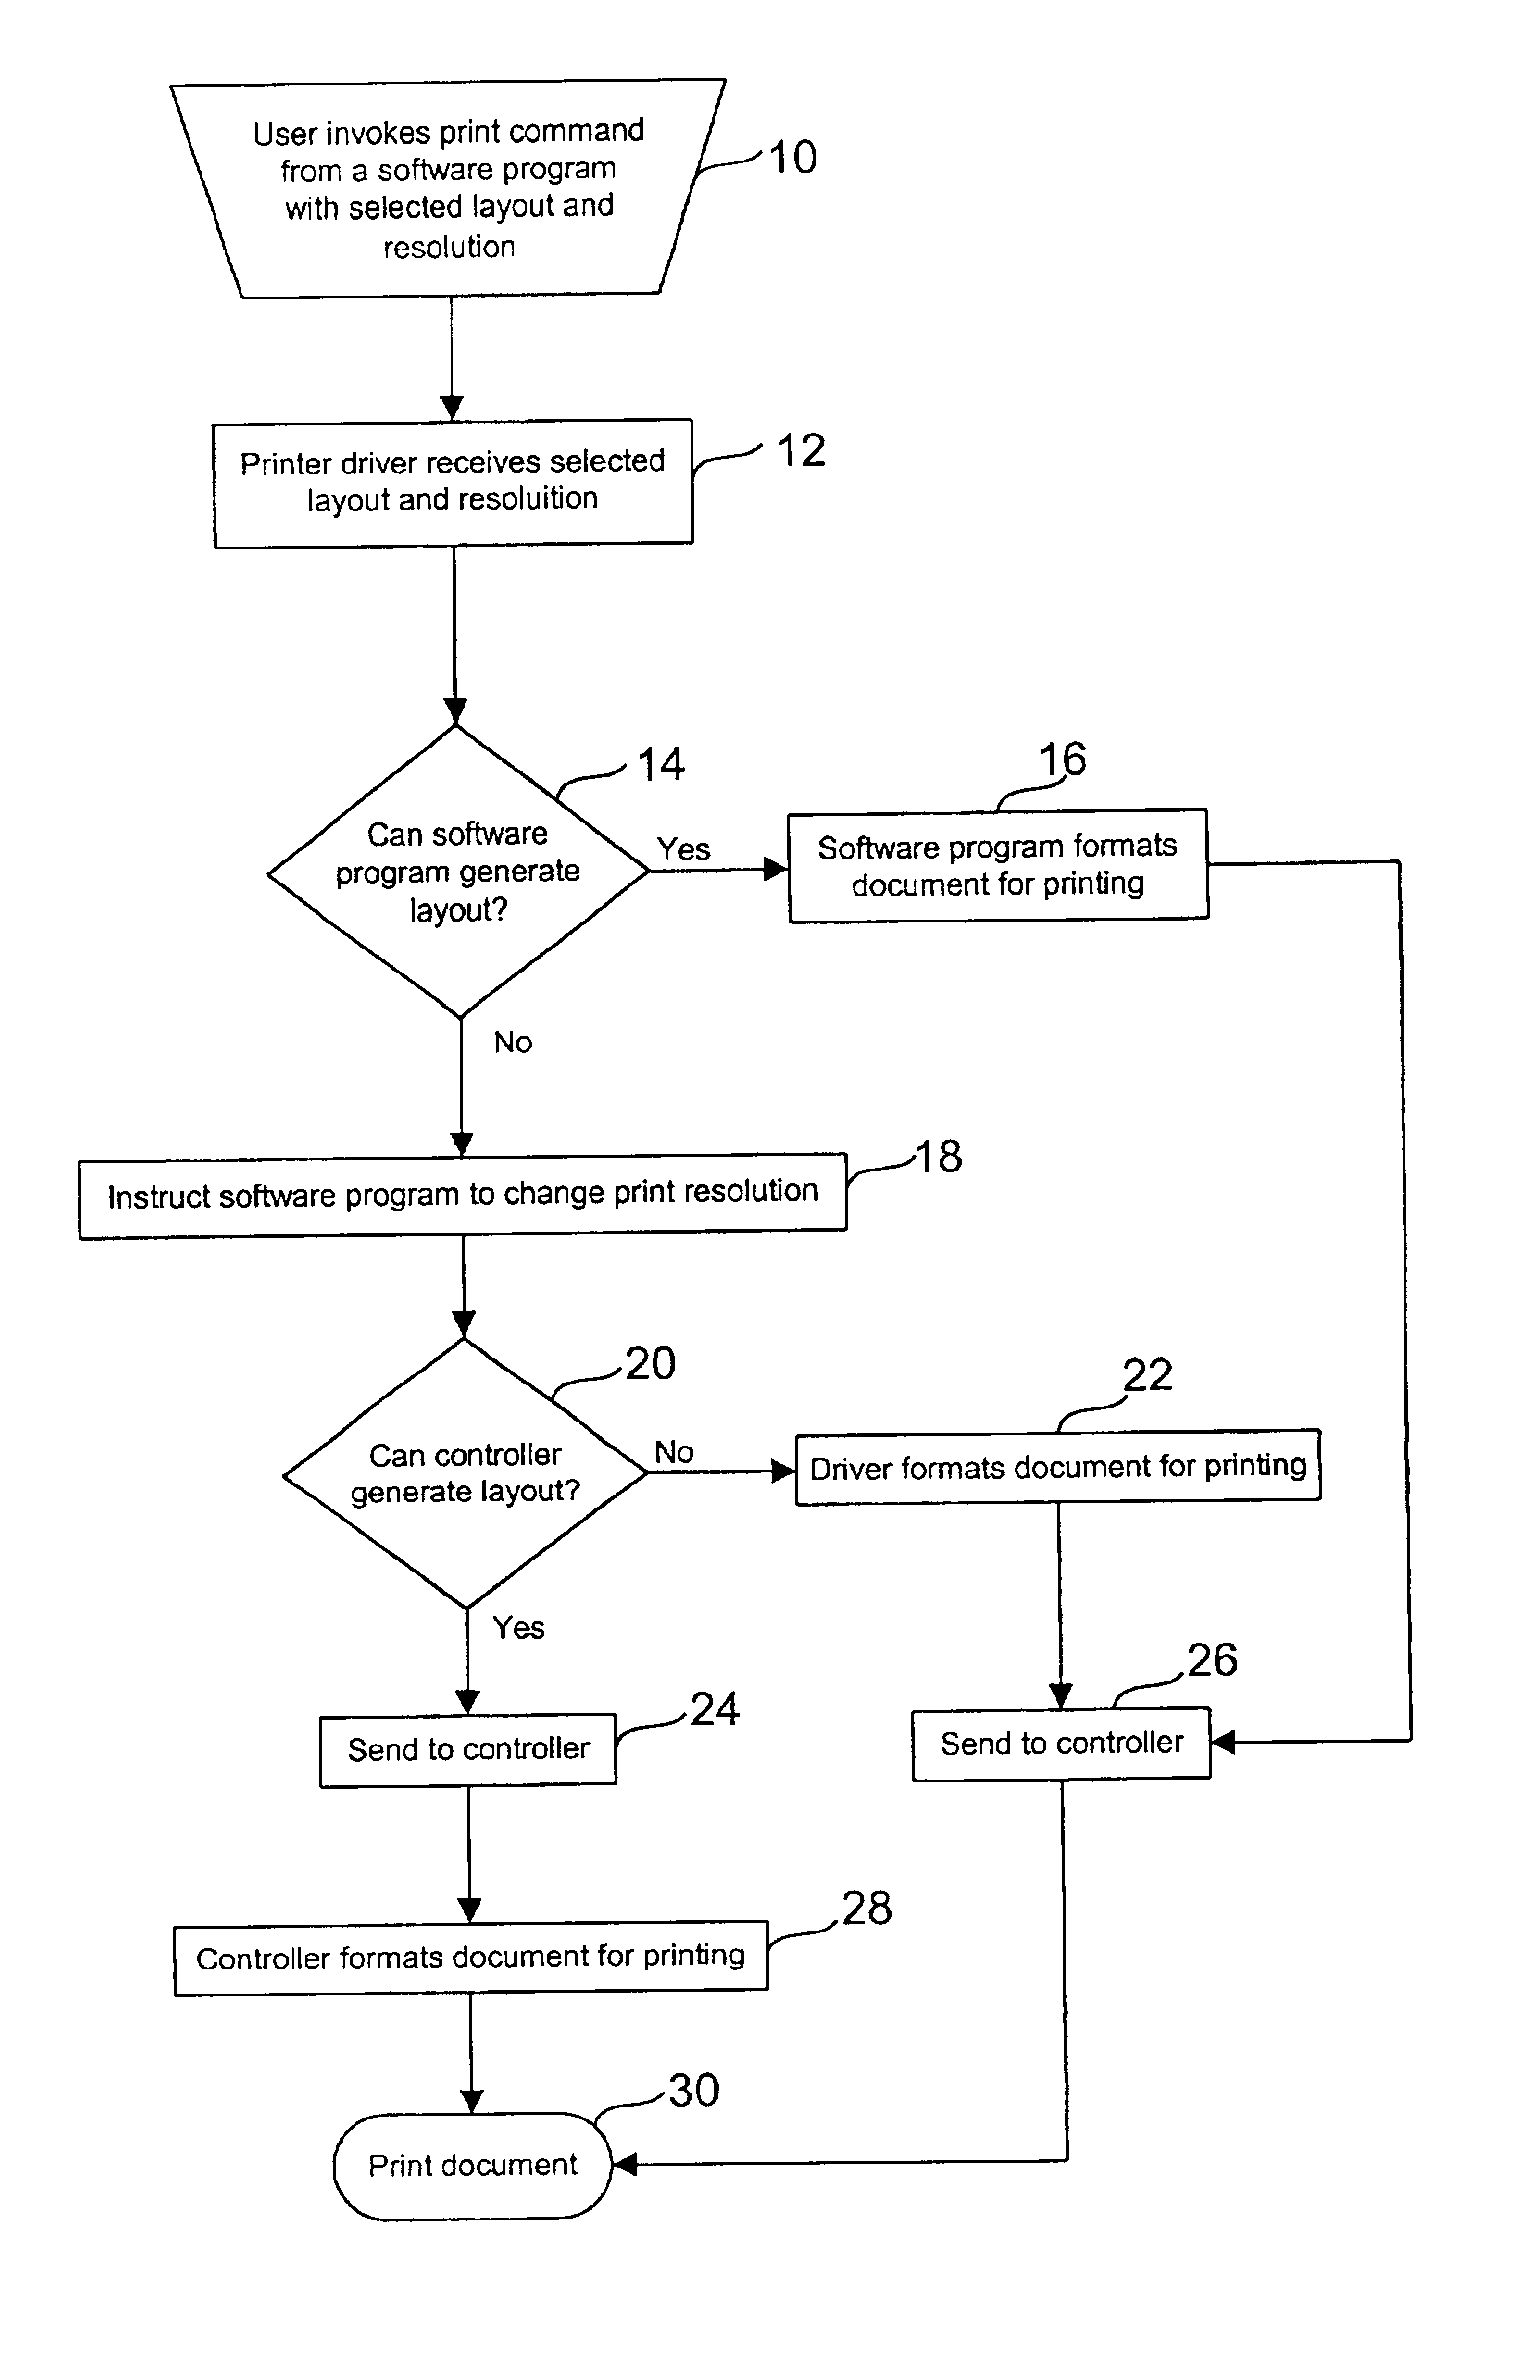 Method to dynamically perform document layout functions